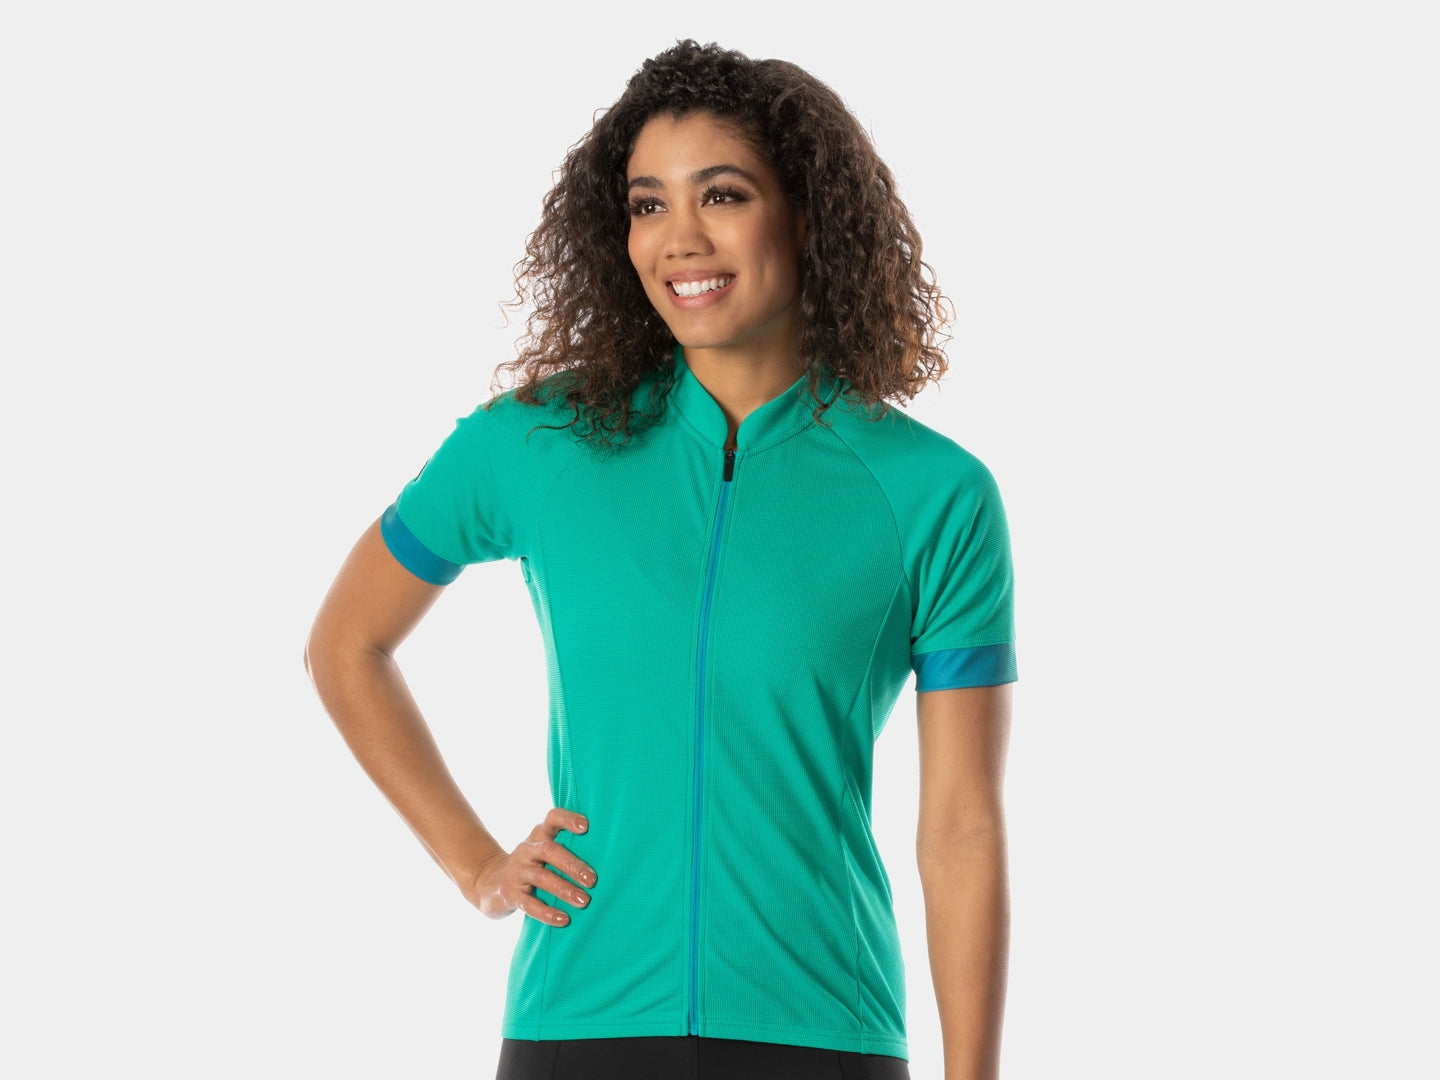 Bontrager Solstice Women's Cycling Jersey- Cycling Jersey- Women's Cycling Jersey- Women's Apparel